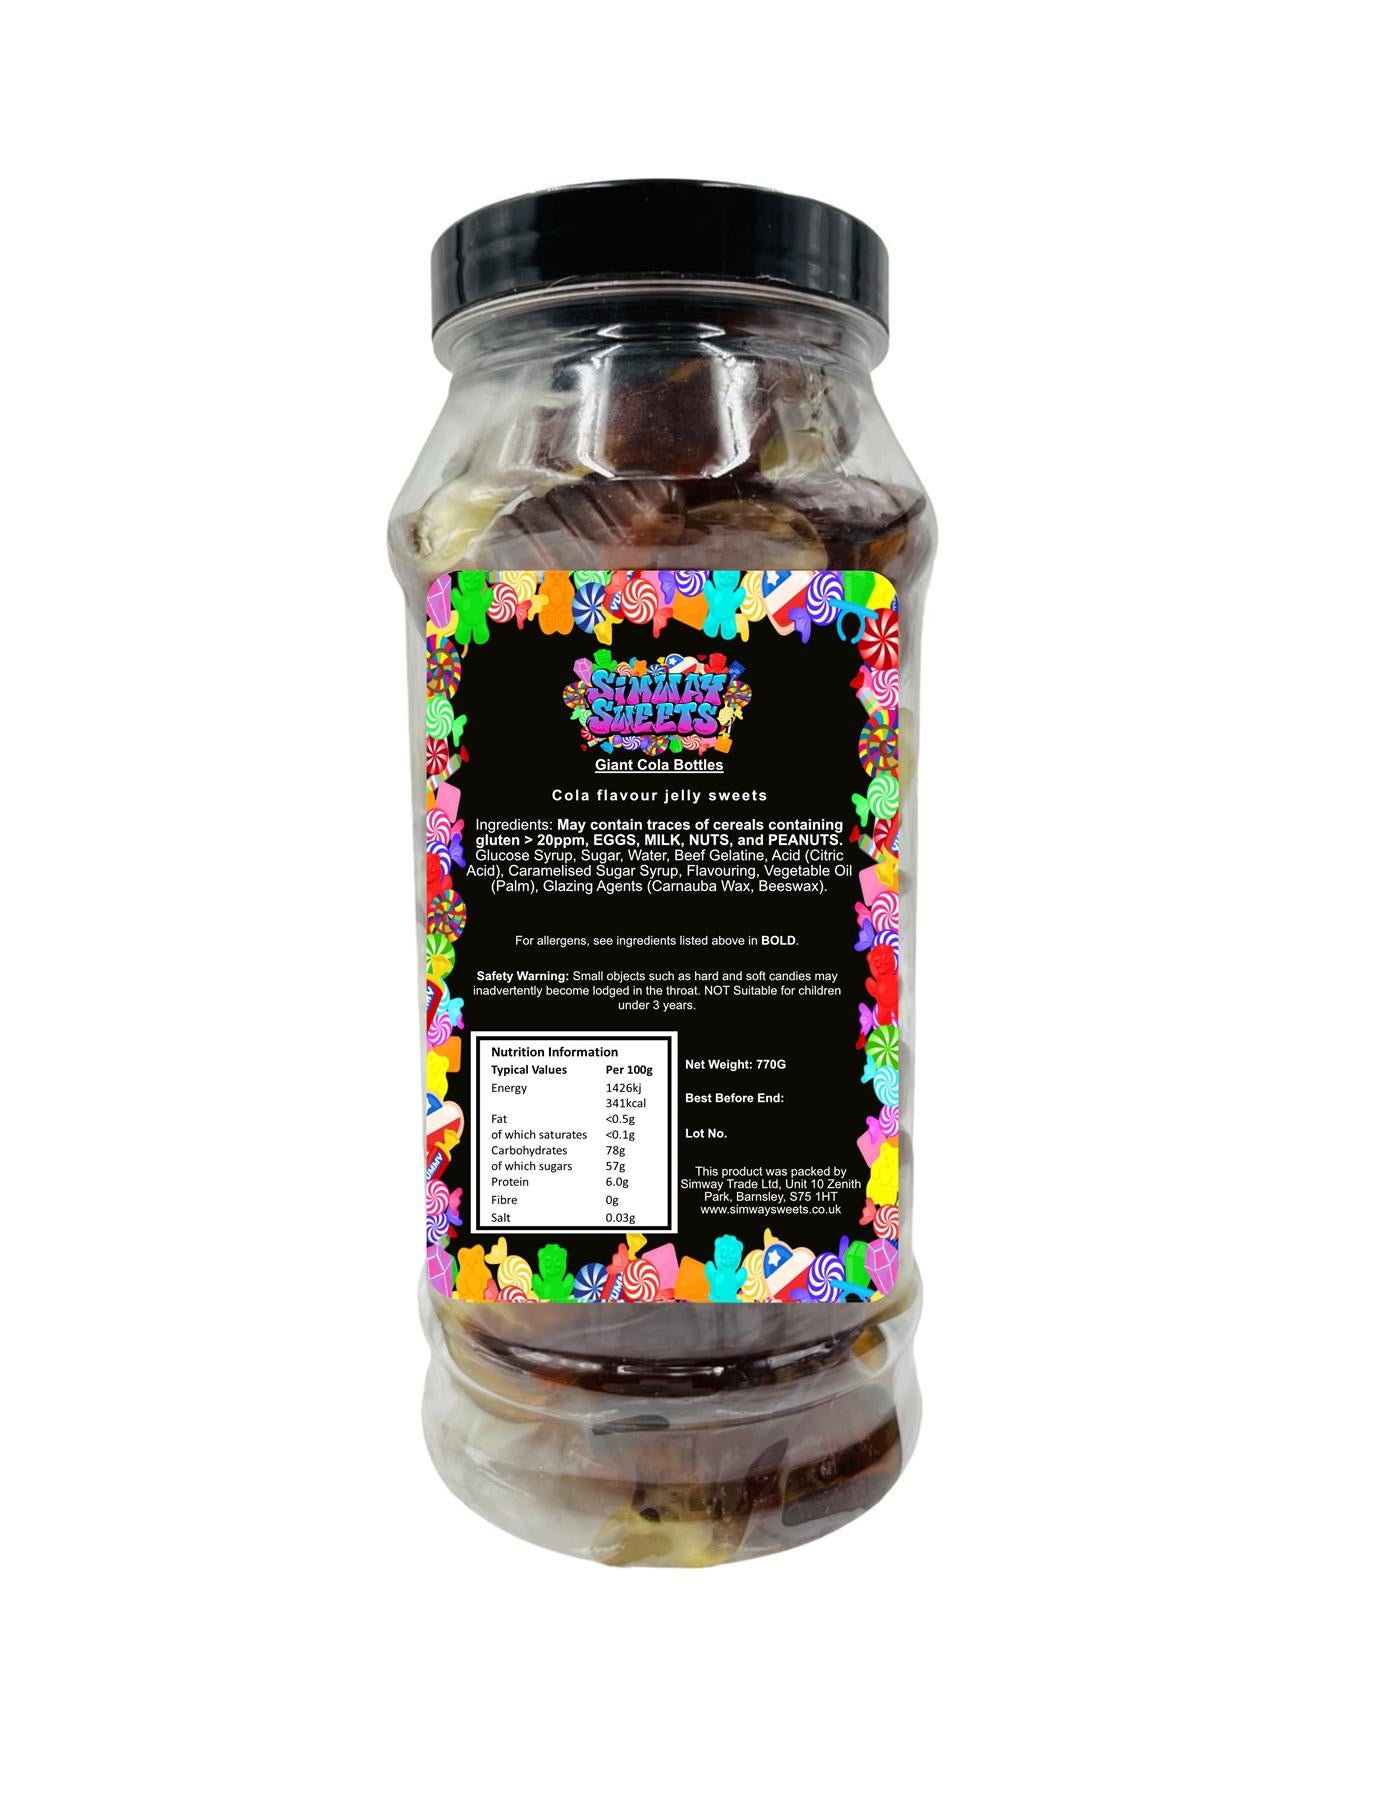 Giant Cola Bottles Retro Sweets Cola Flavoured Gummy Sweets Gift Jar - 770g